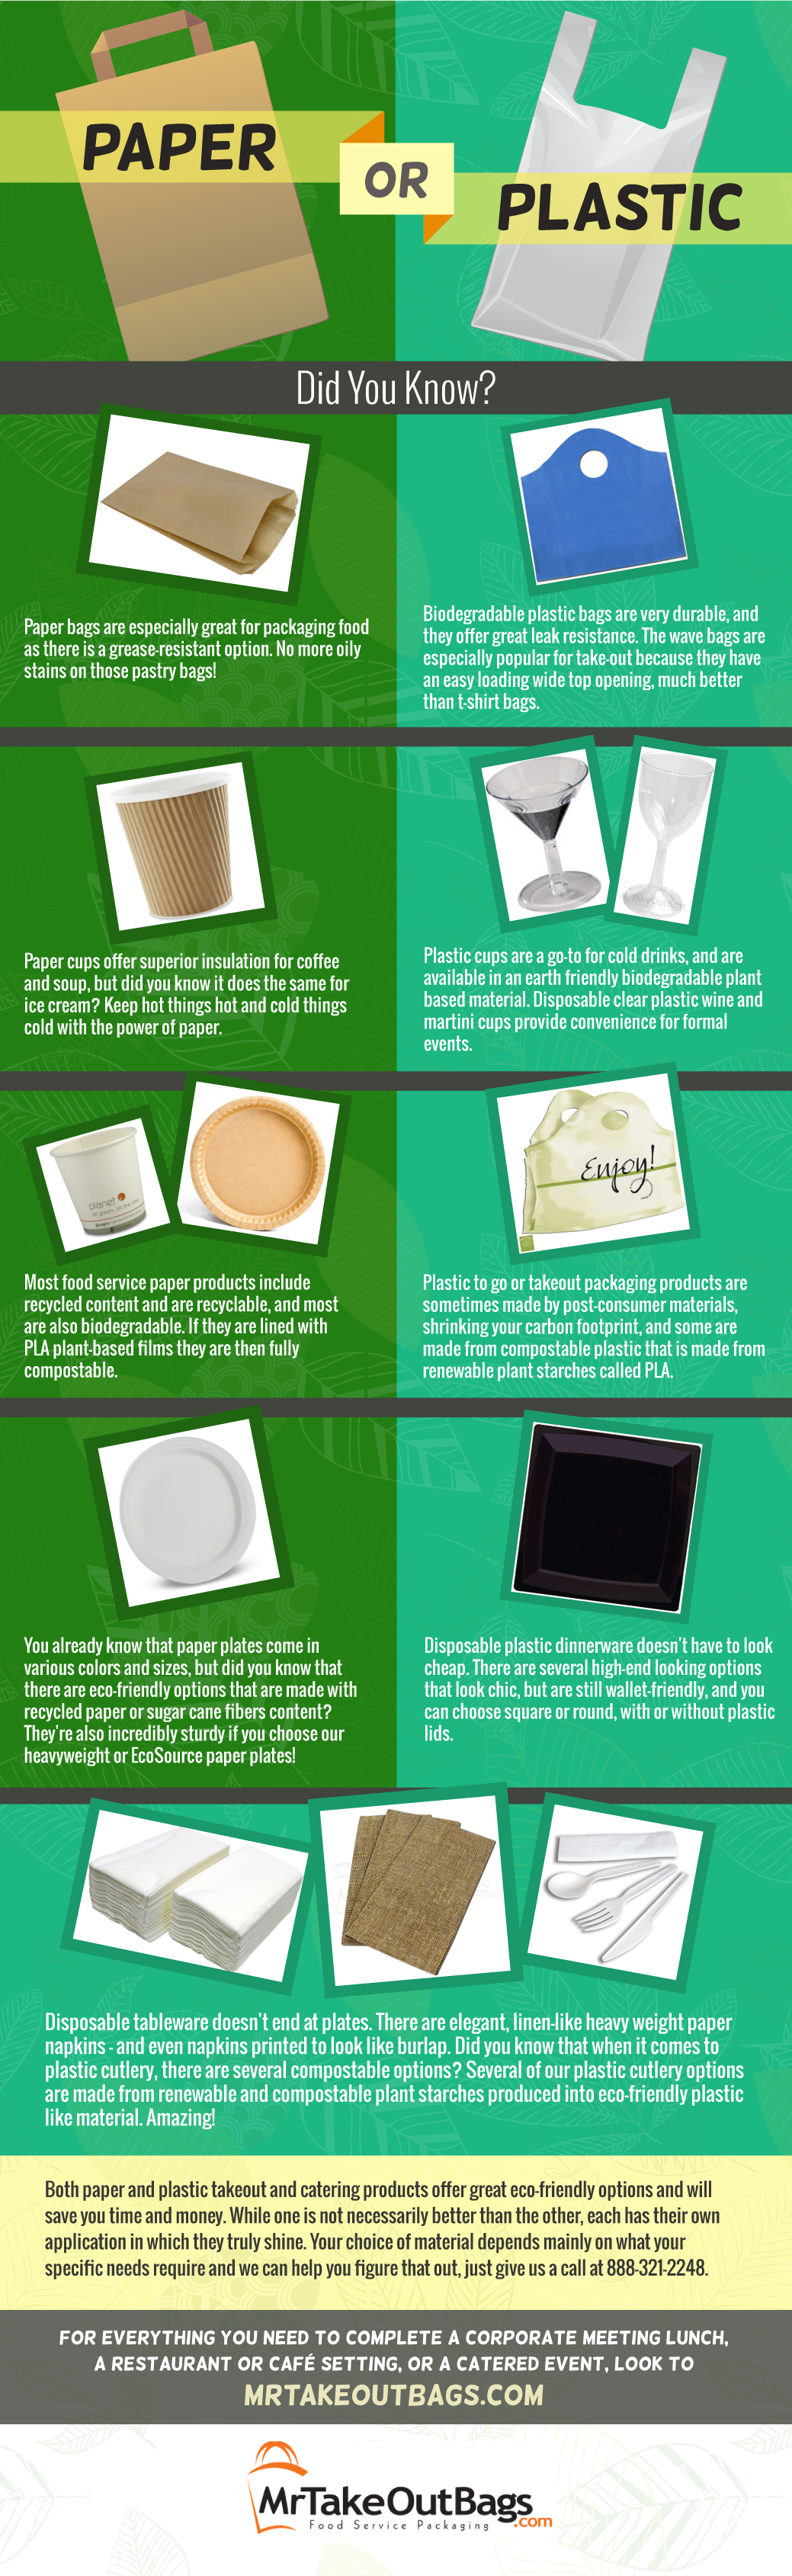 mrtakeoutbags-plastic-paper-infographic